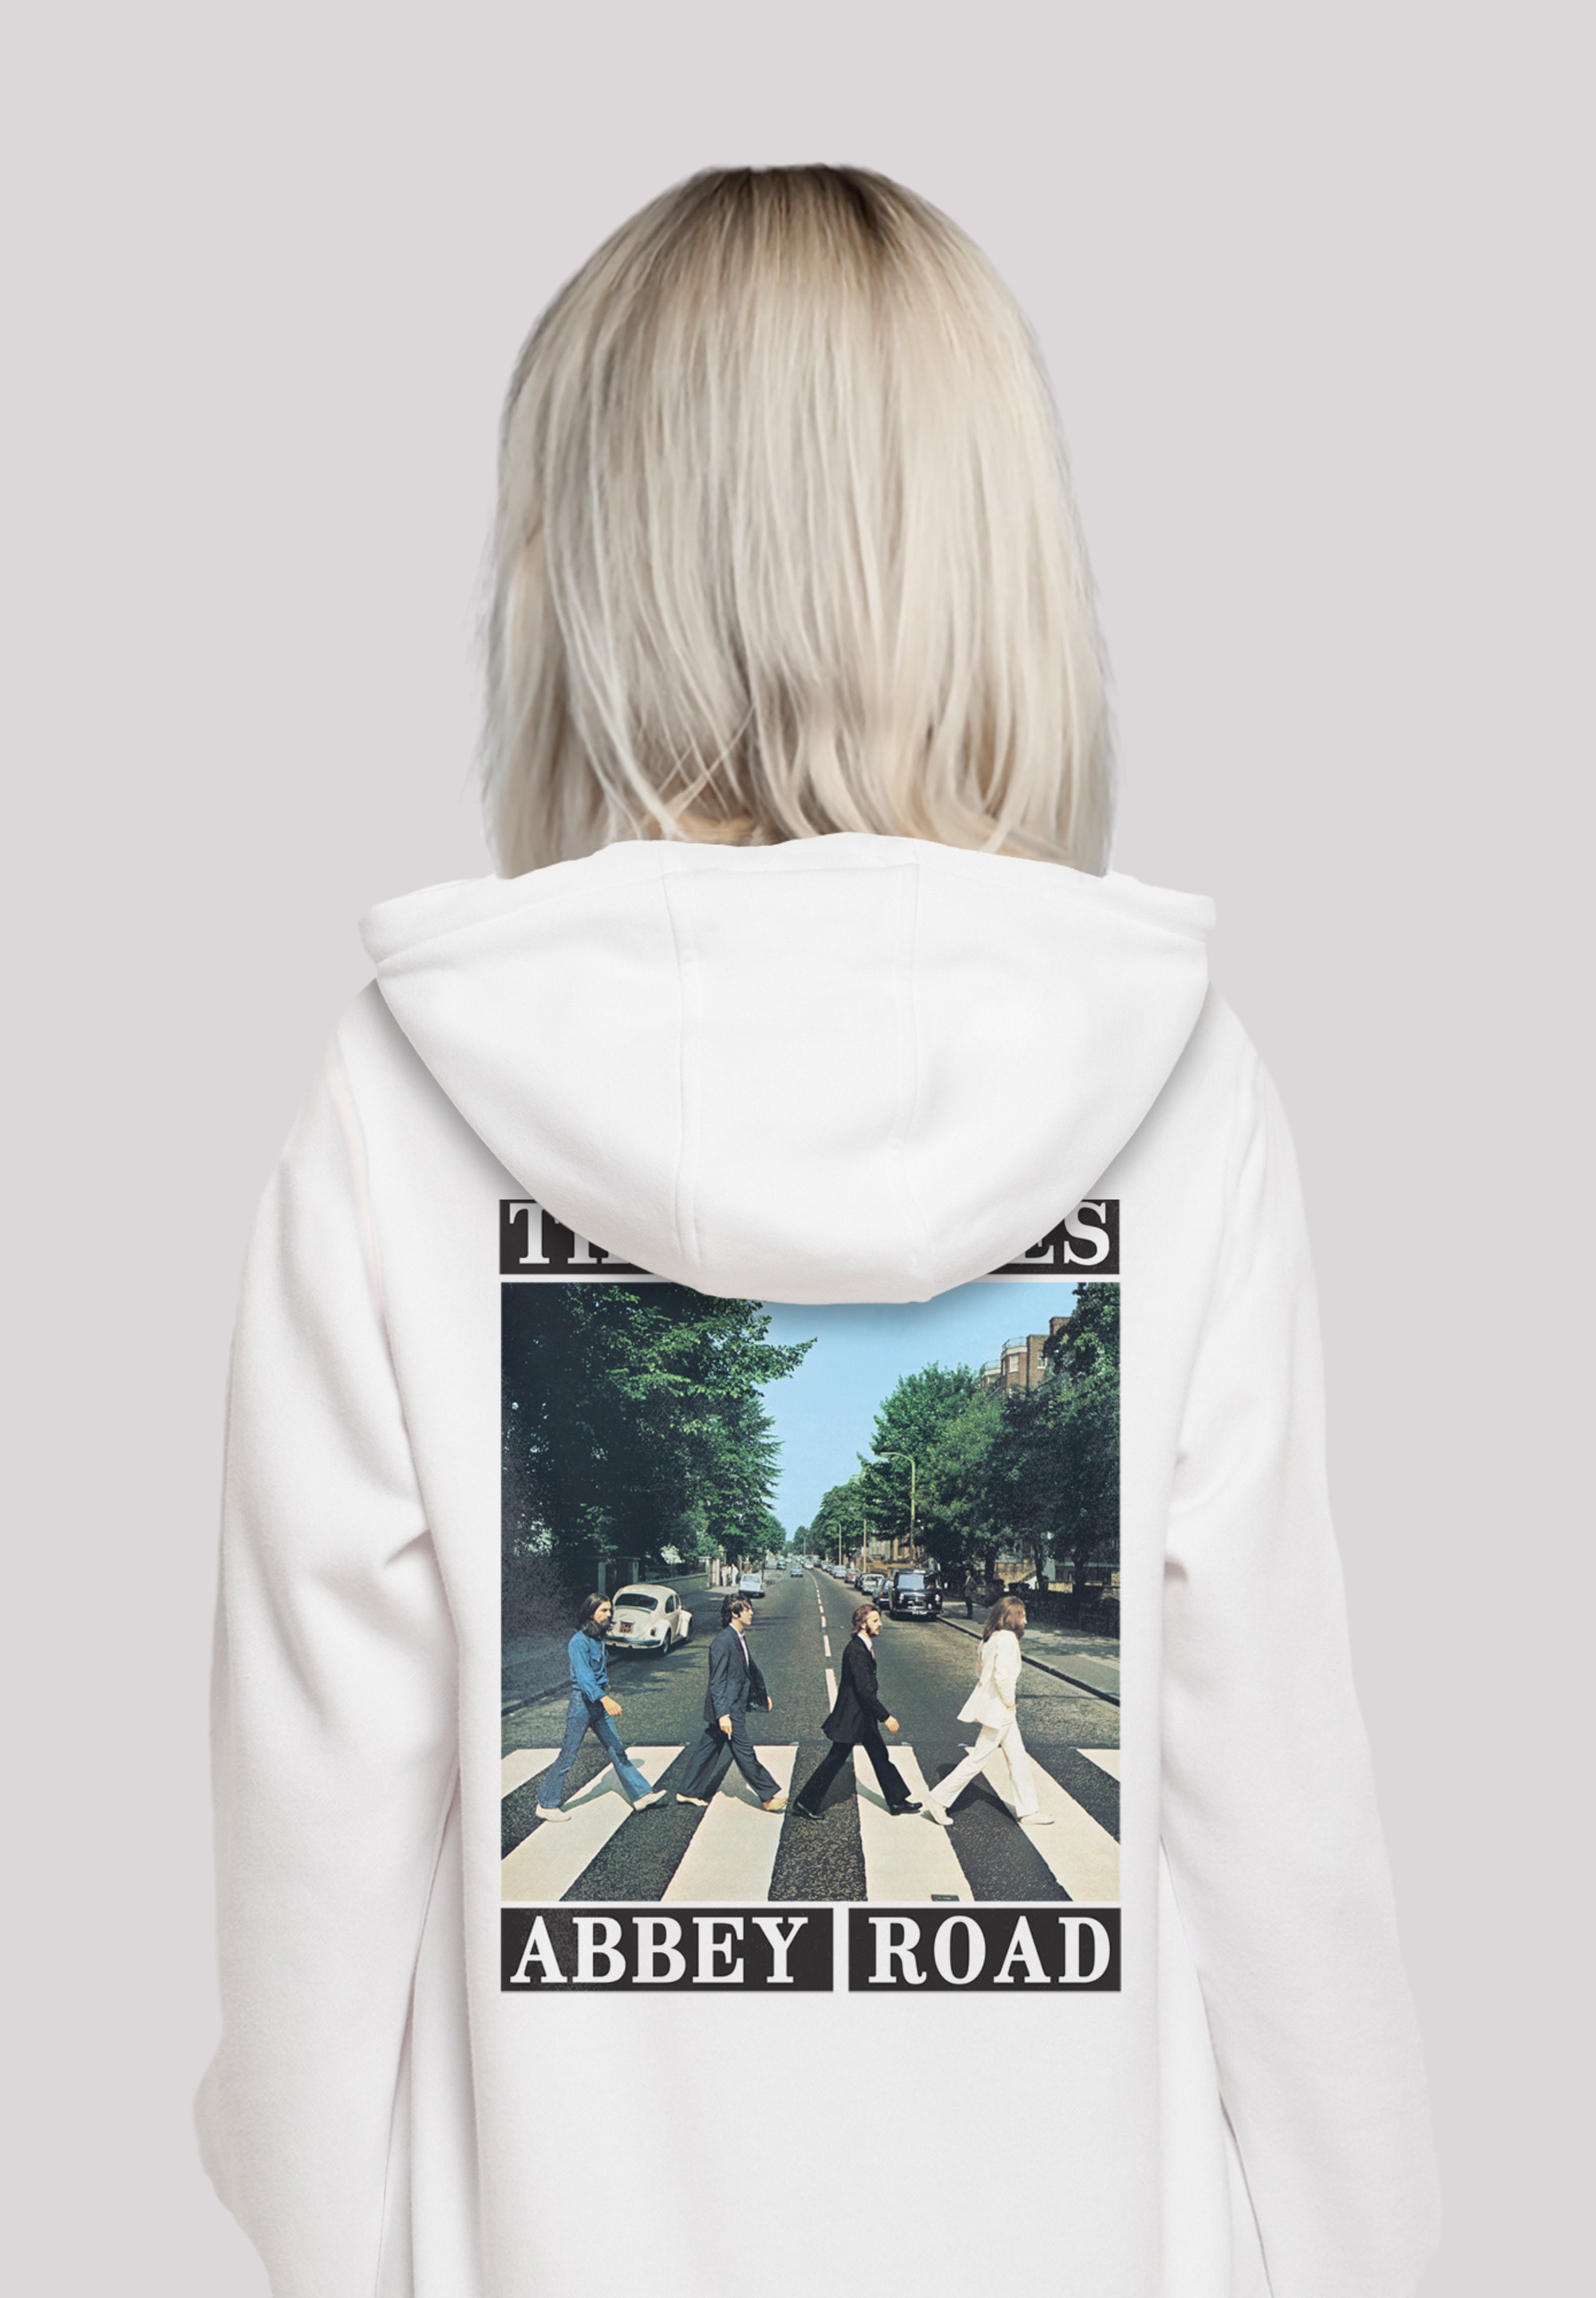 F4NT4STIC Kapuzenpullover »The Beatles Abbey kaufen | I\'m walking Band«, Hoodie, Road Musik Rock Warm, online Bequem